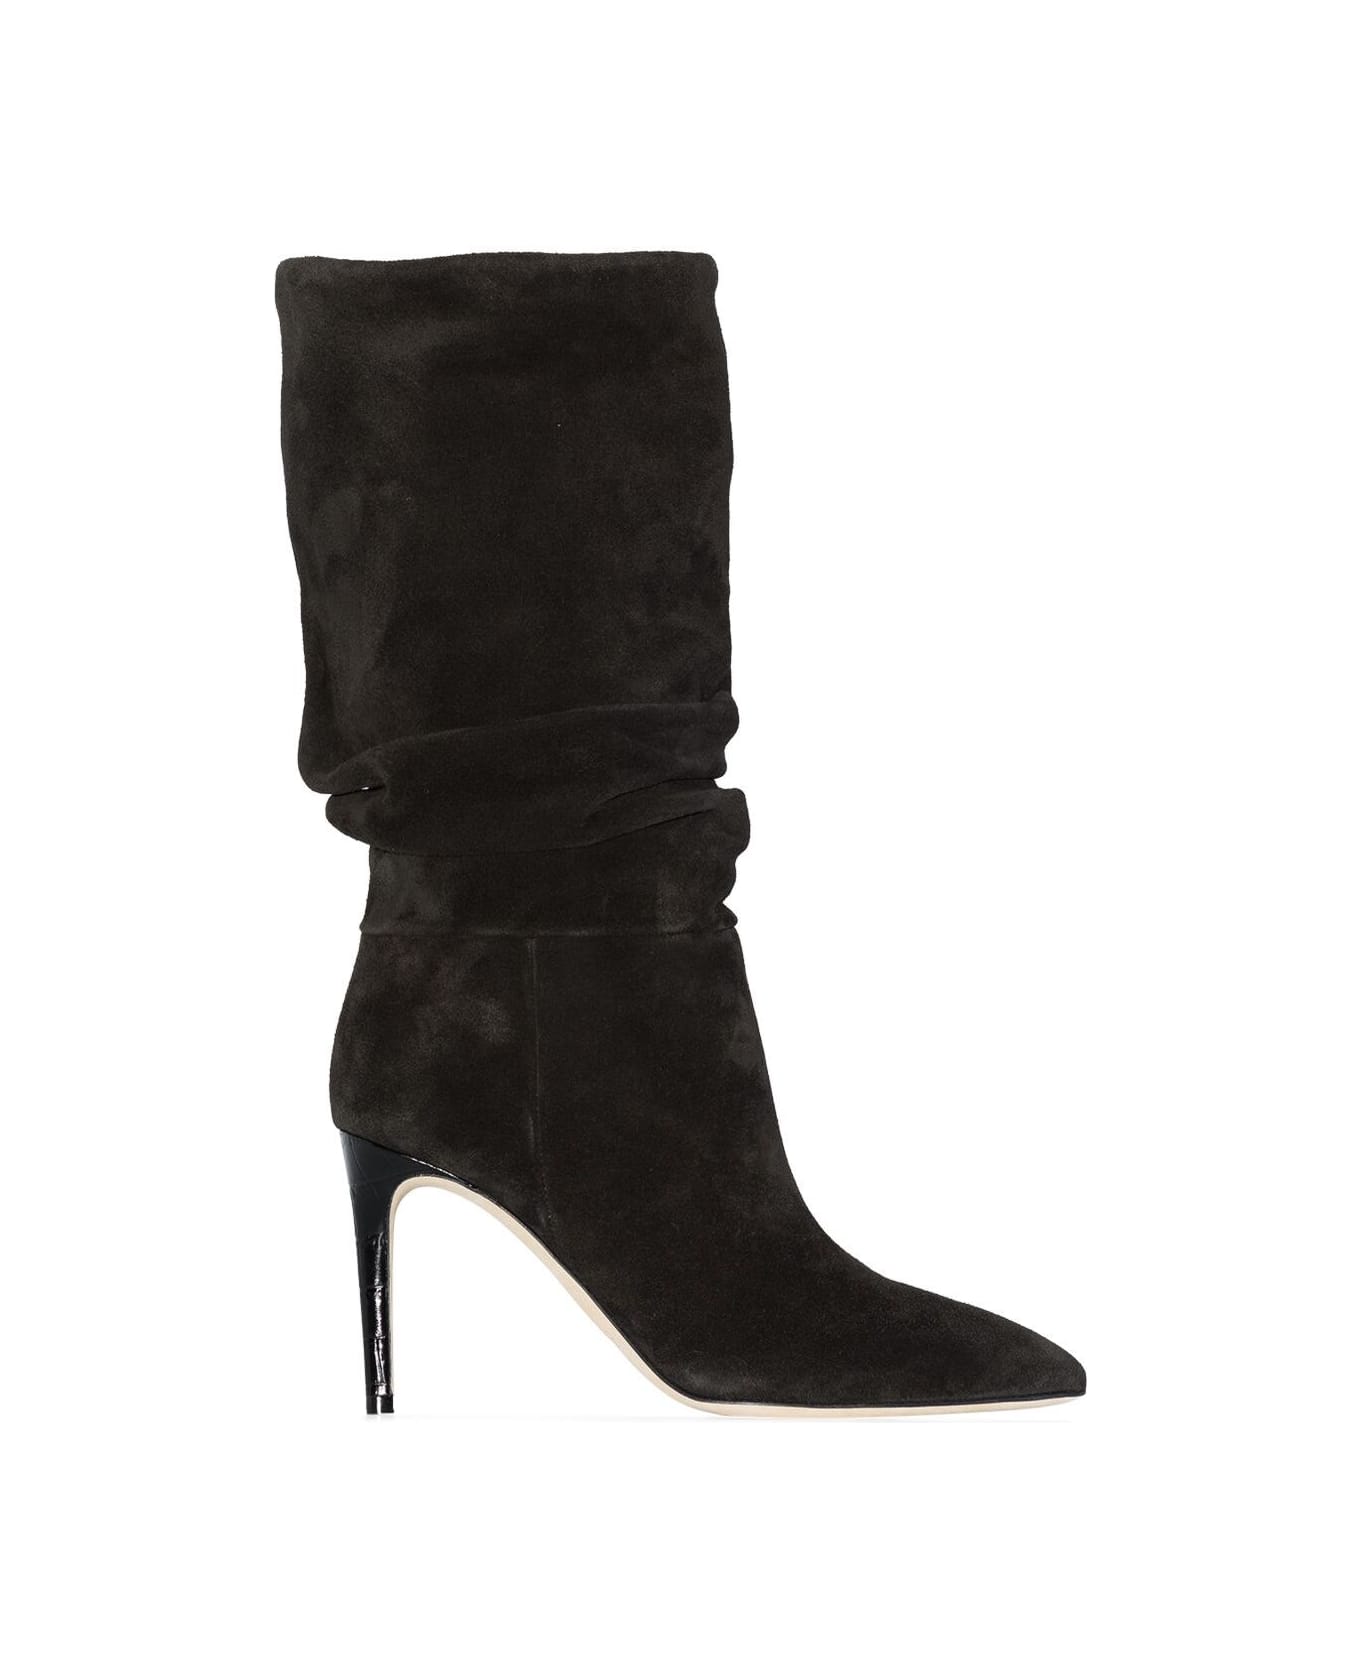 Paris Texas Black Slouchy Pointed Boots With Stiletto Heel In Suede Woman - Black